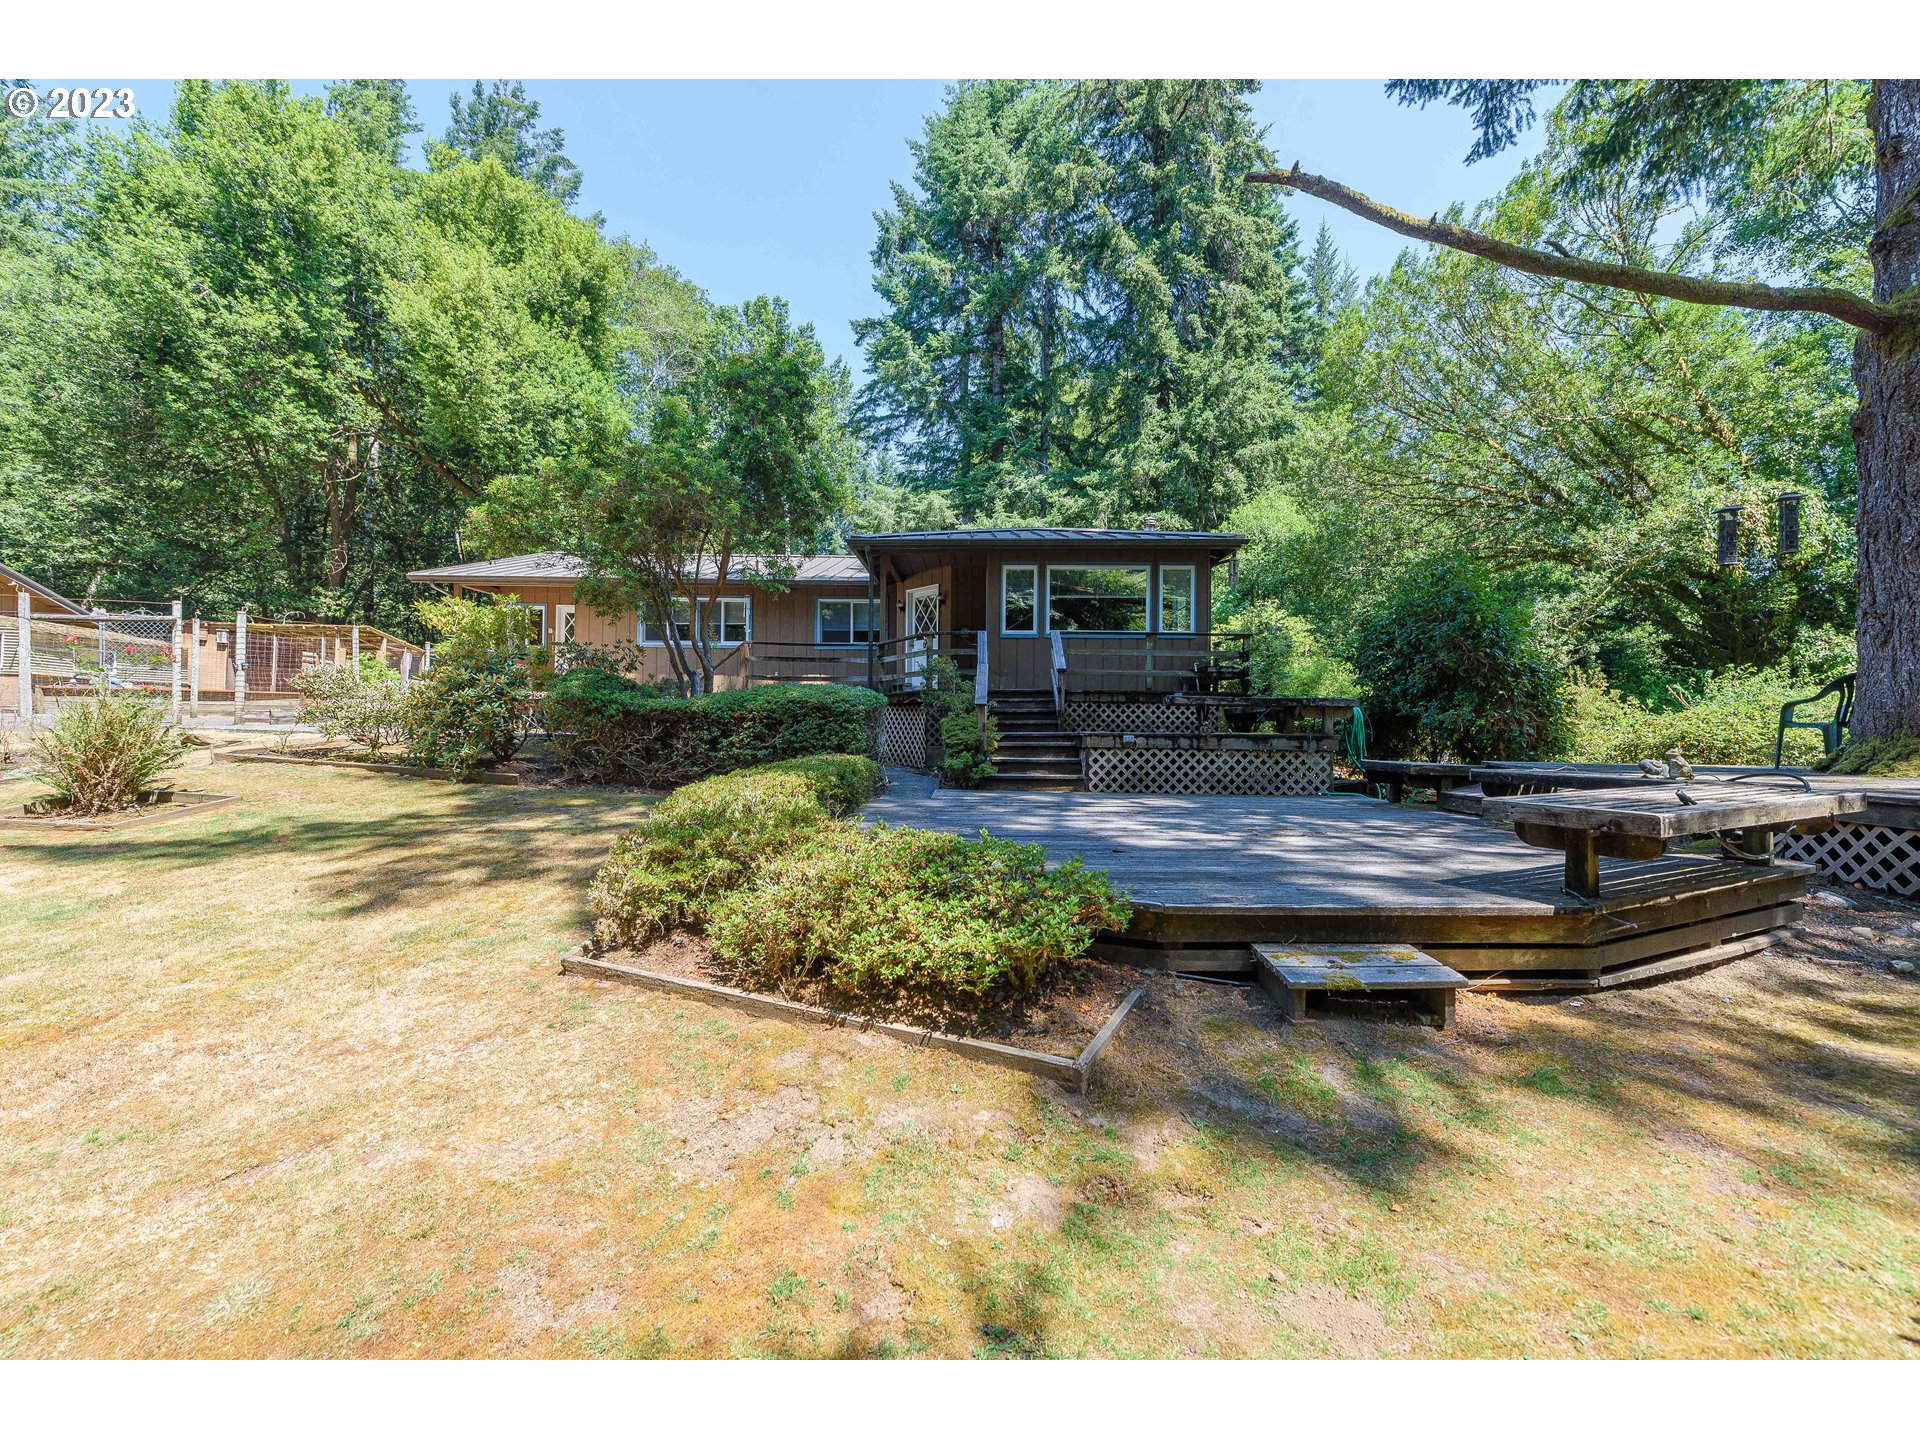 55782 FAIRVIEW RD, Coquille, OR 97423